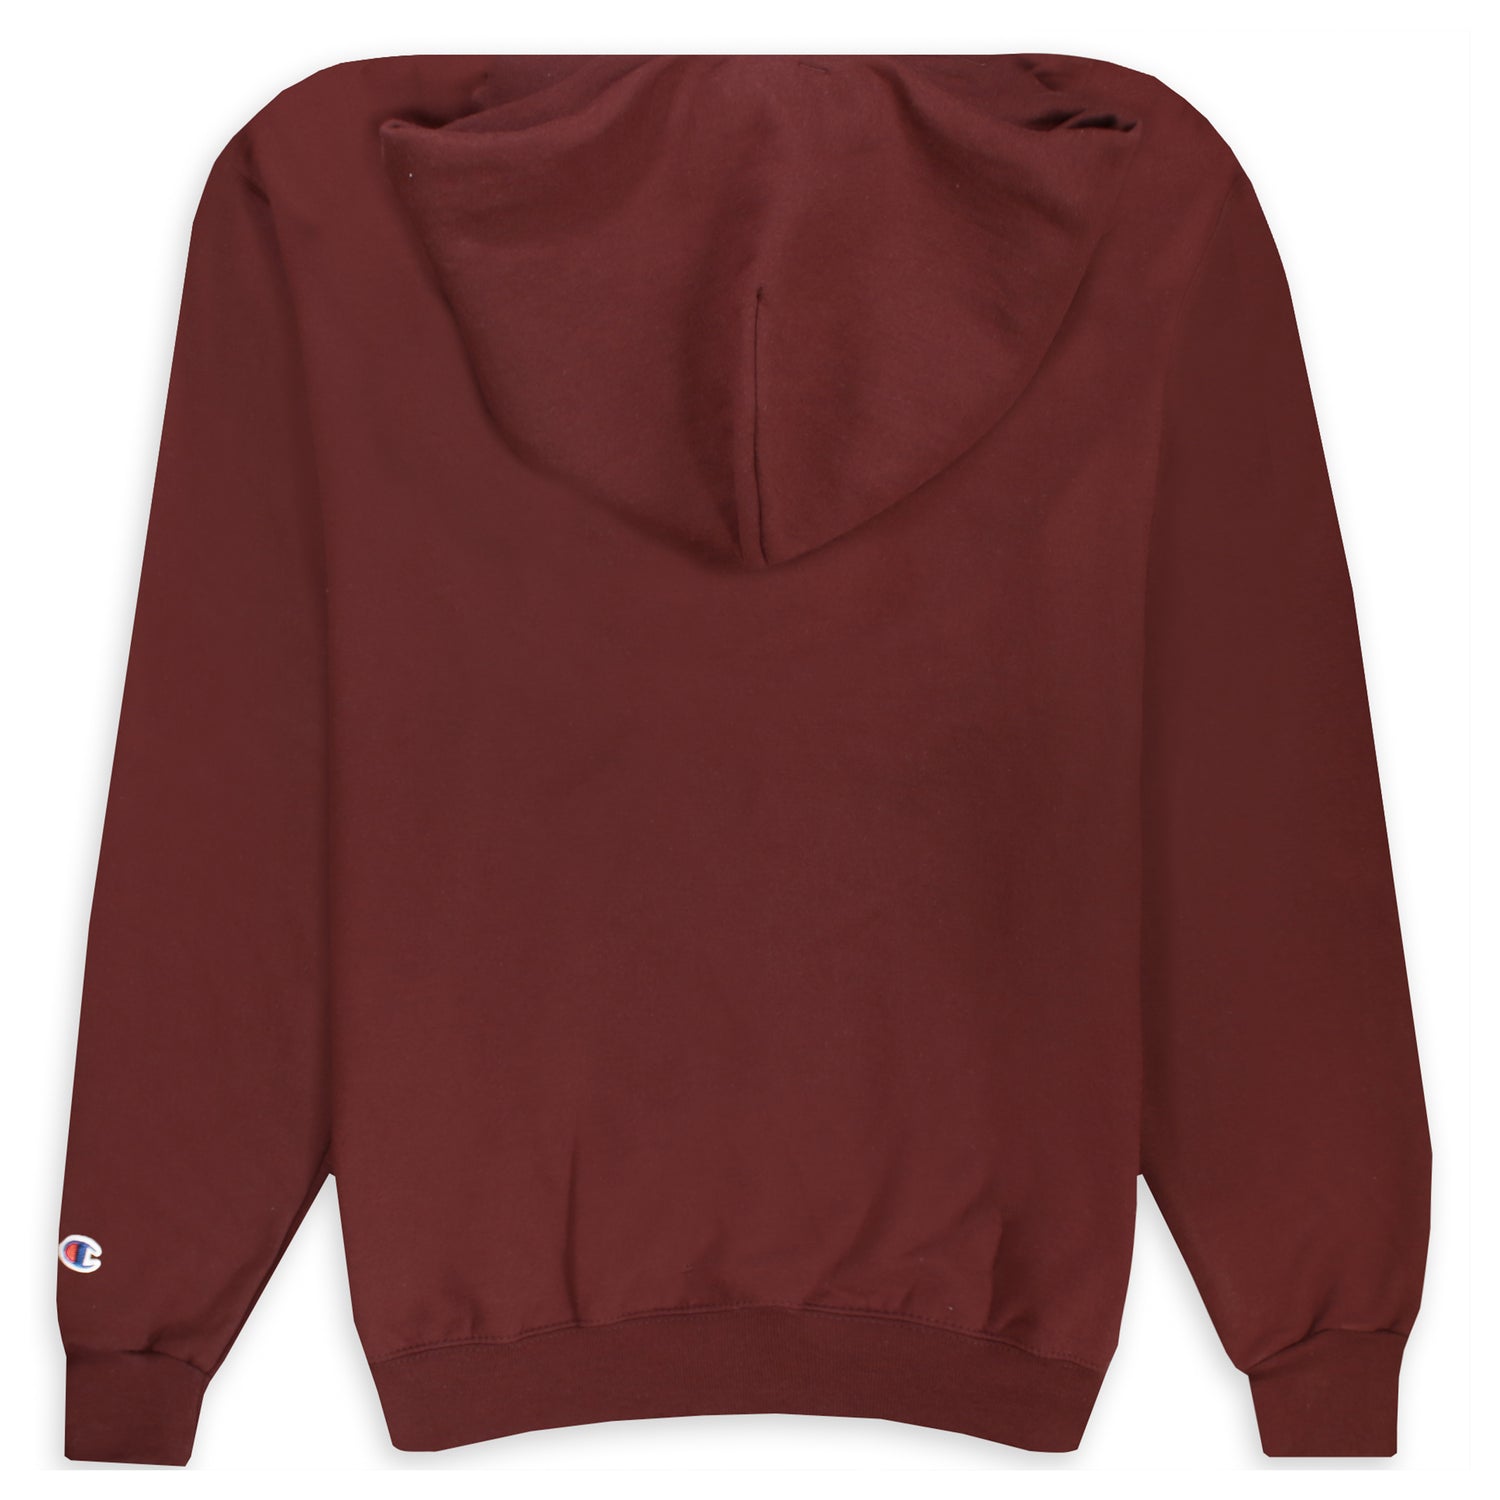 Texas A&M Champion Youth Maroon Powerblend Hoodie